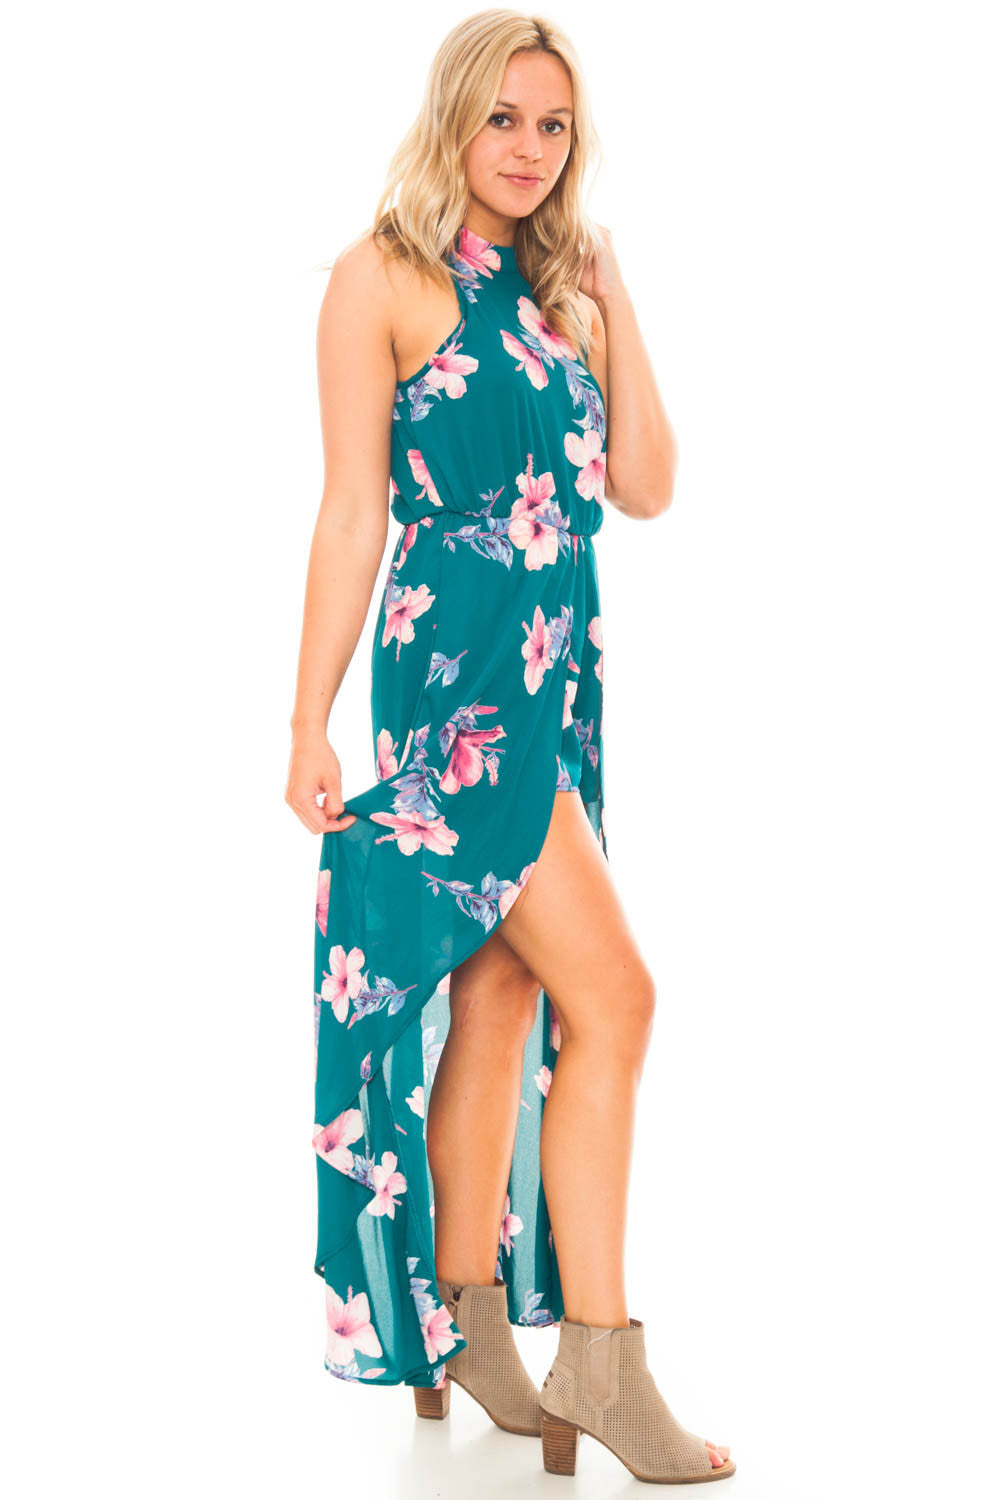 Romper - Floral Romper With Skirt Overlay